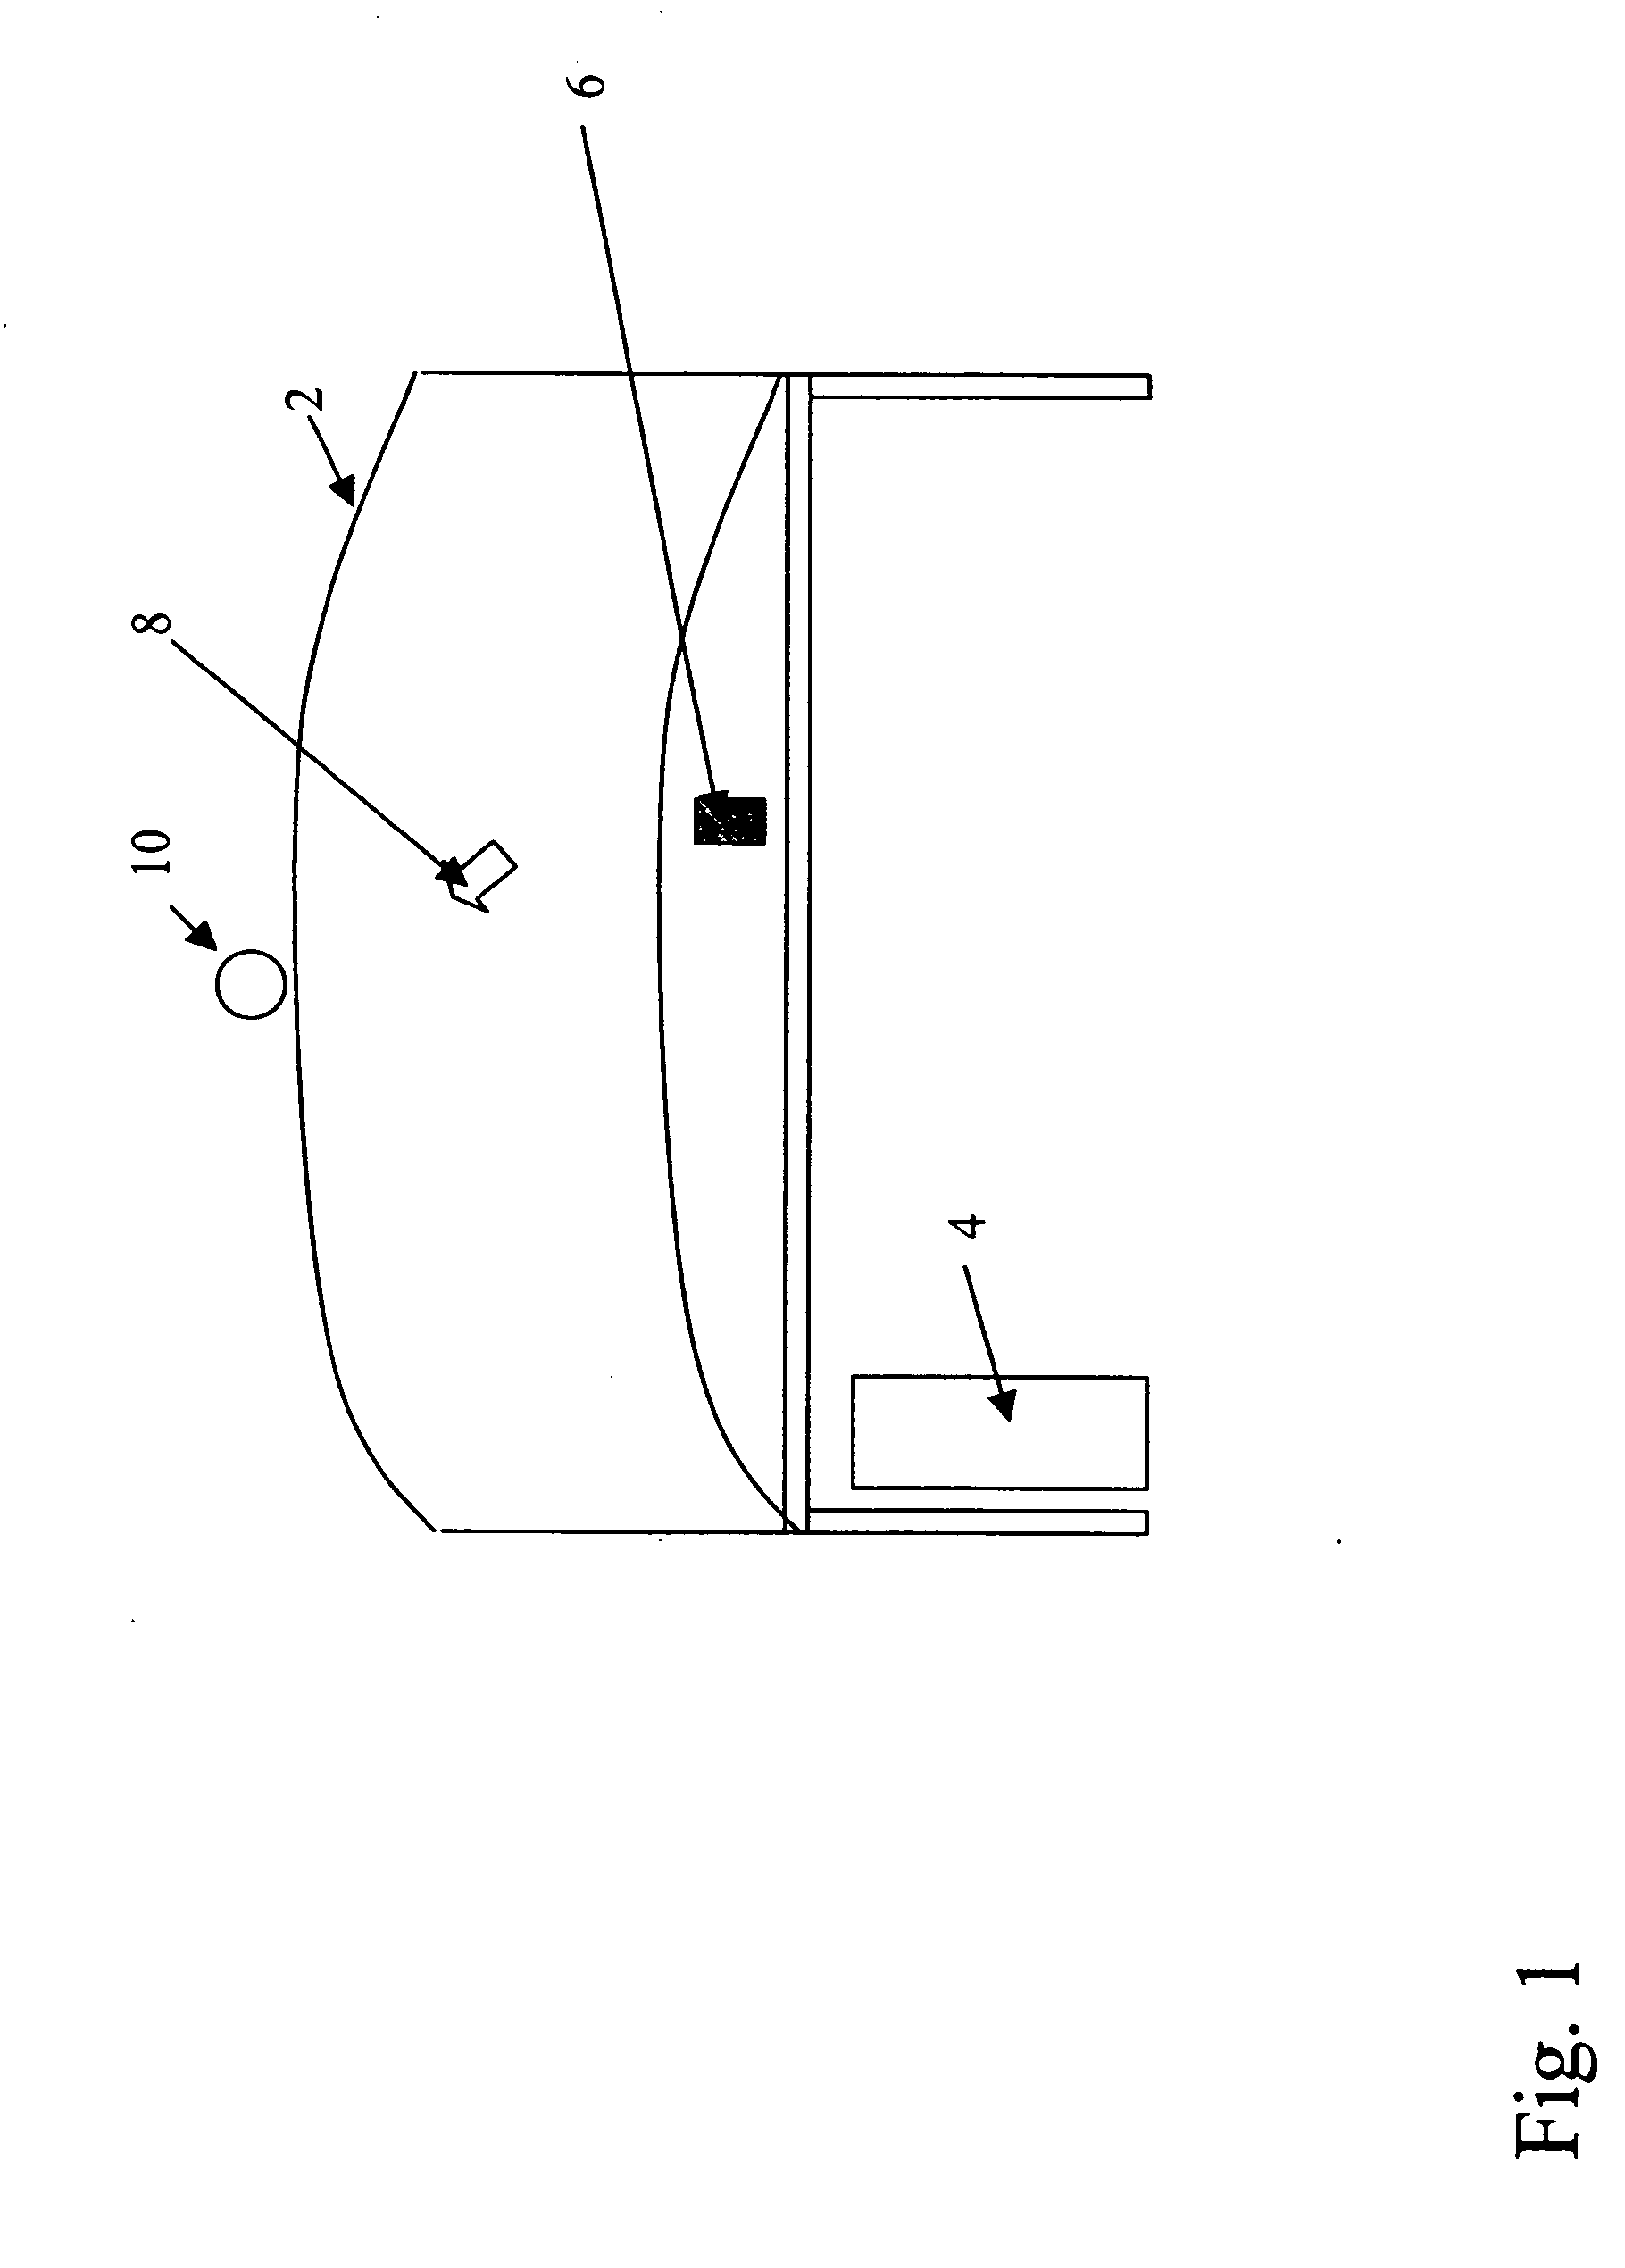 Pointing device for large field of view displays